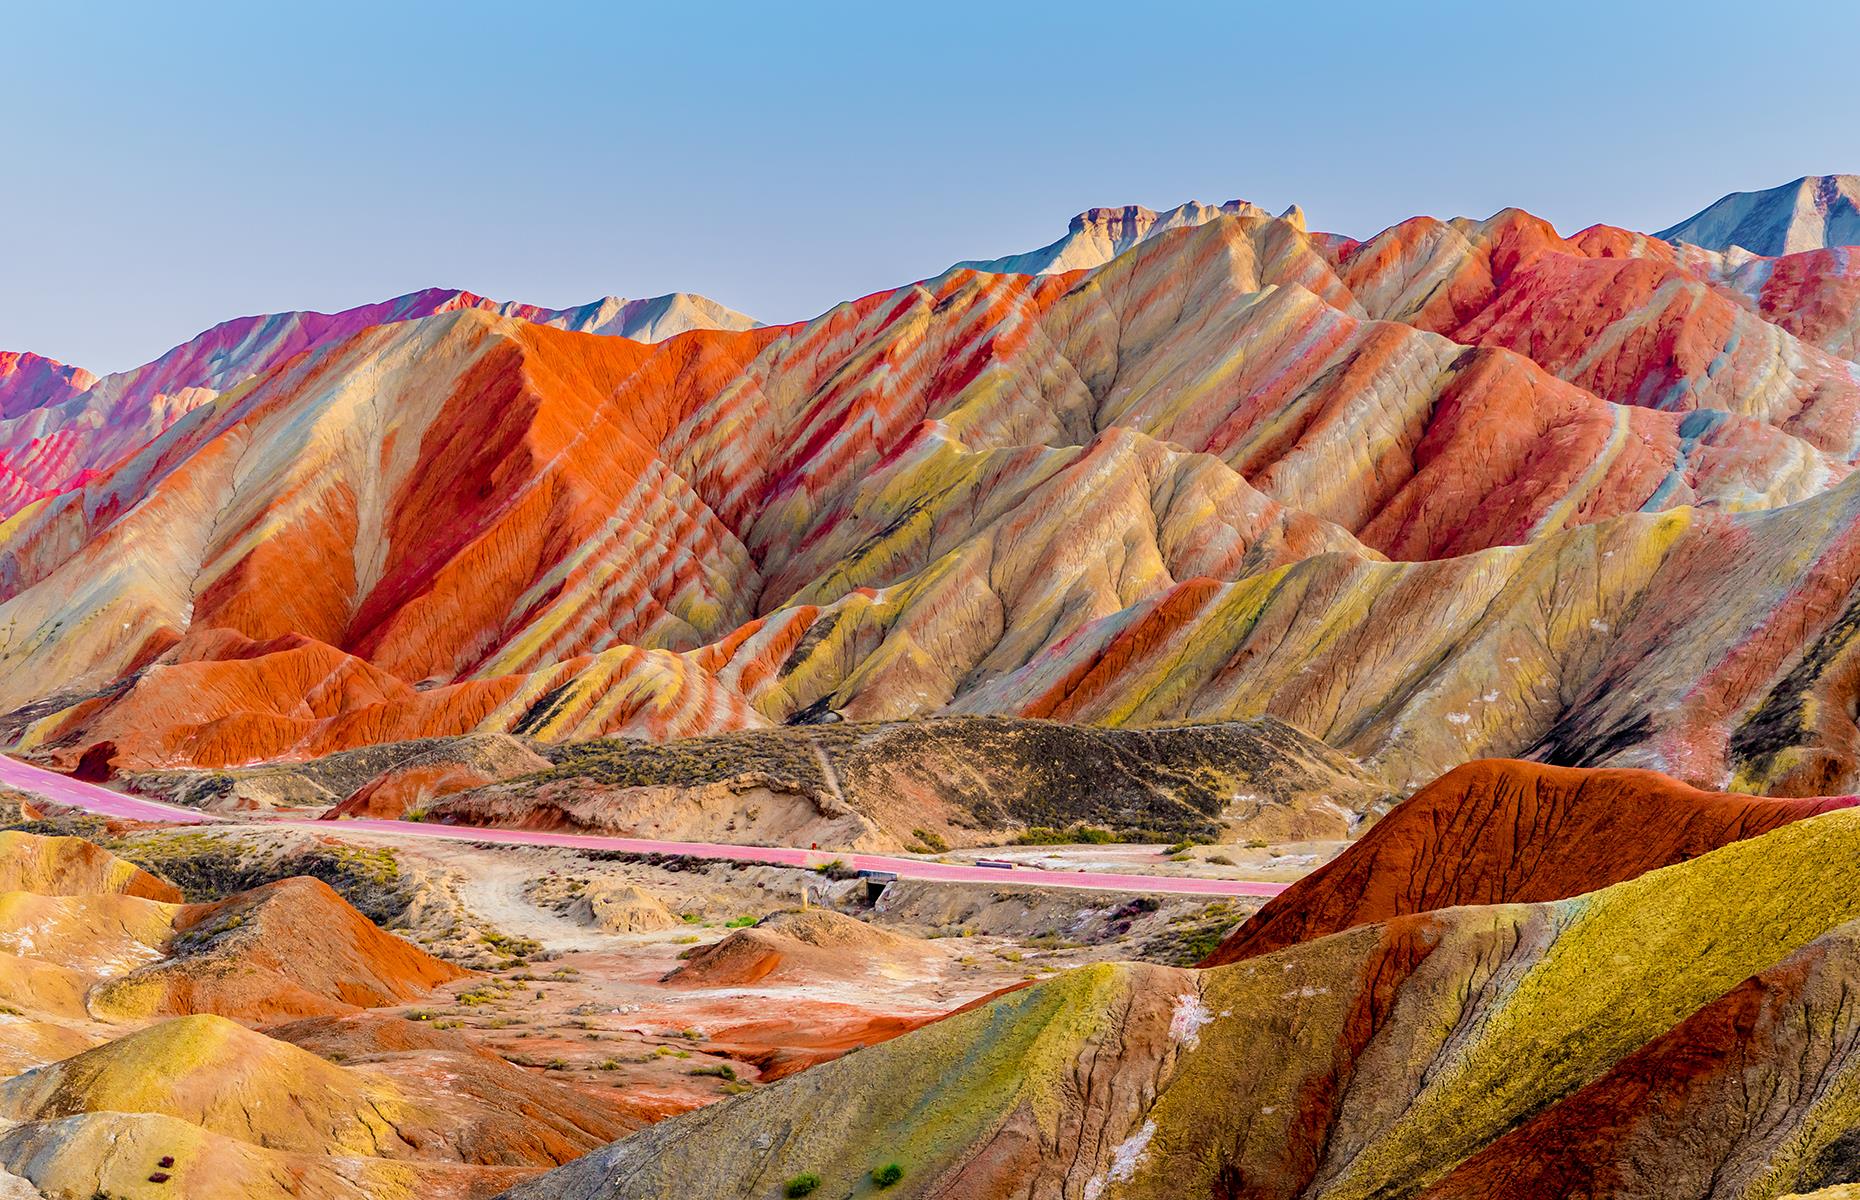 The stunning rainbow landscape of the Zhangye Danxia mountains, dubbed "the eye candy of Zhangye" by locals, is located in Gansu, China. Geologists believe the colorful layers of red sandstone and other mineral deposits built on top of each other over millions of years before a dramatic tectonic shift caused the mountains to form.